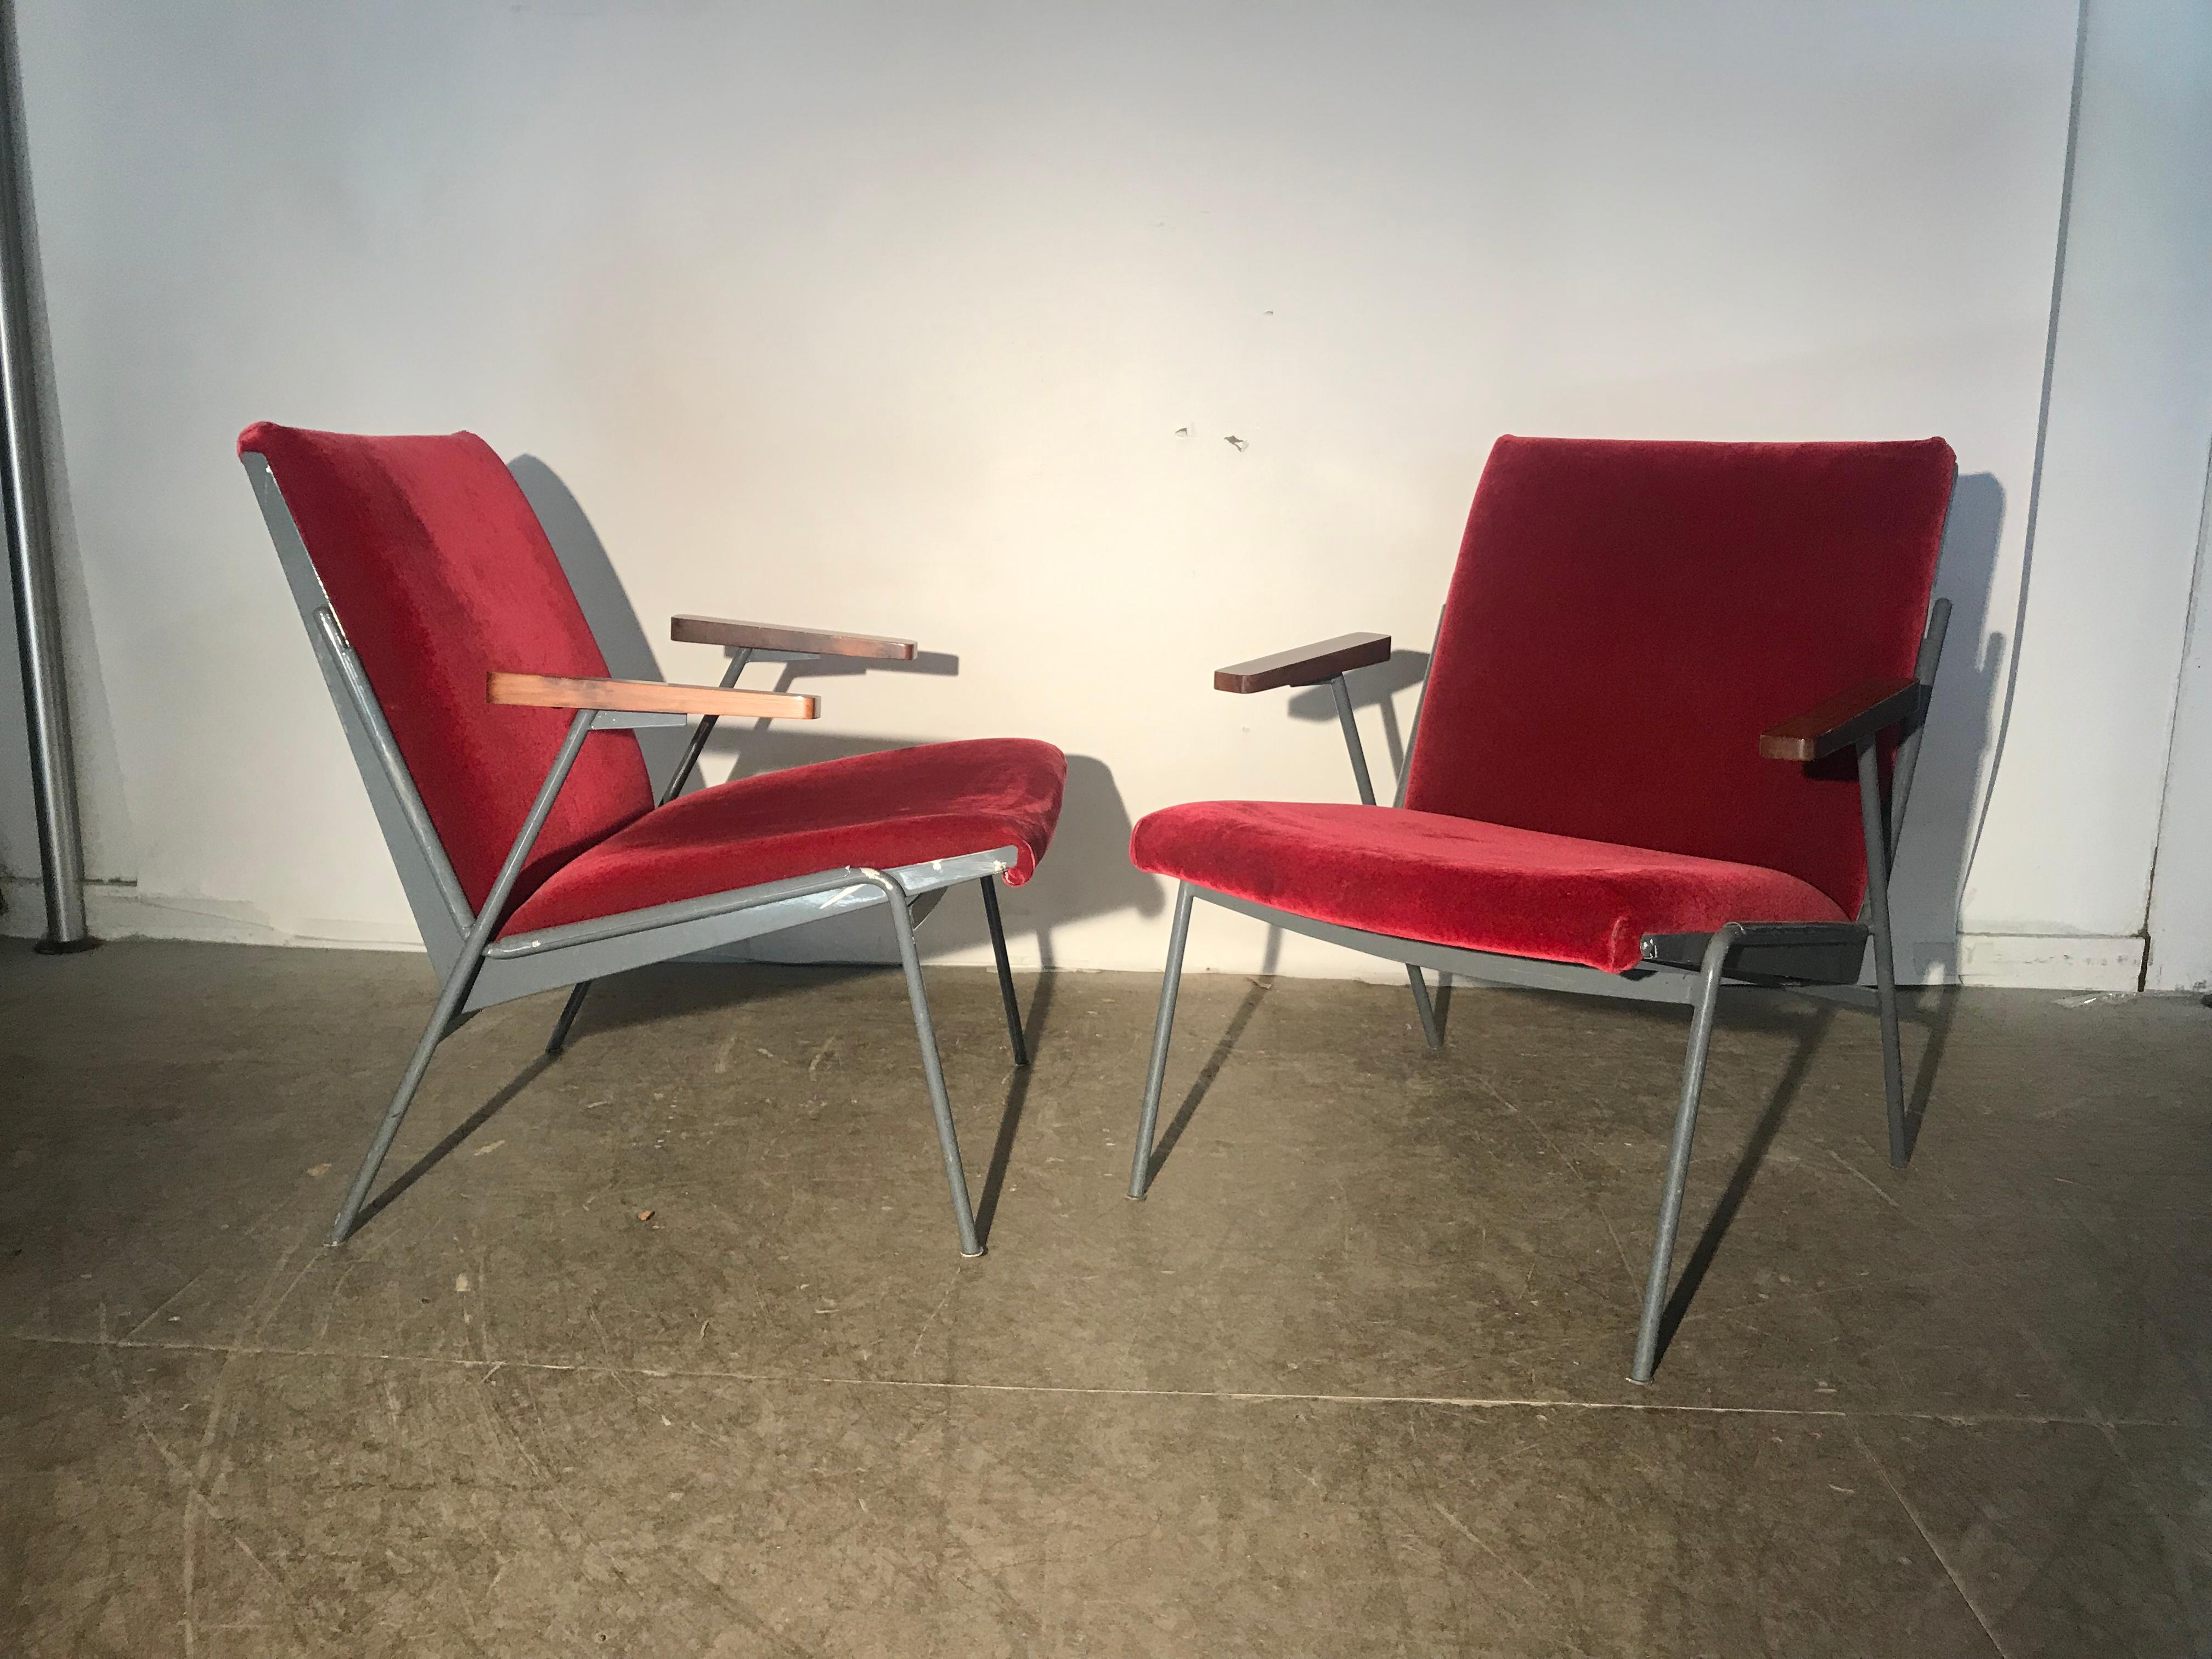 Matched Pair of French Modernist Lounge Chairs in Red Mohair Jean Prouve Style For Sale 3